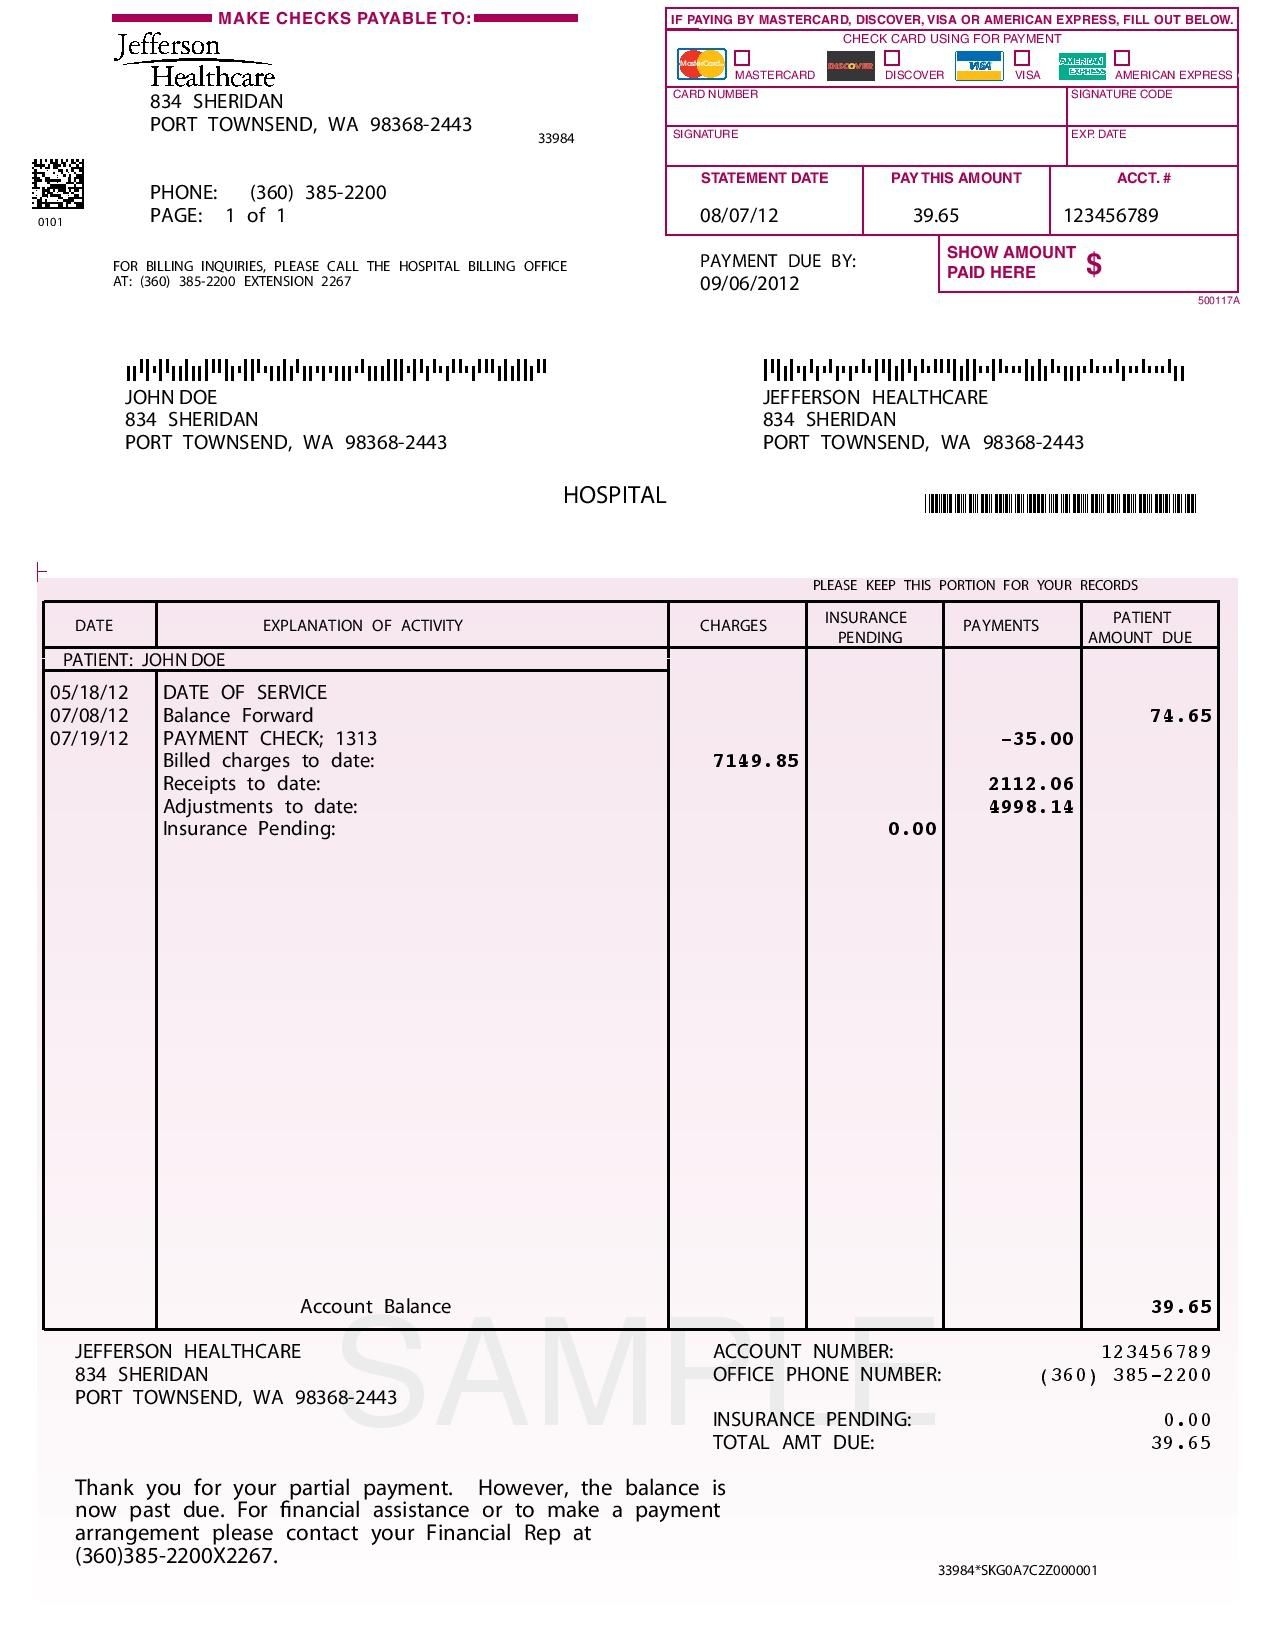 10 best images of sample of invoice for payment sample invoice with payment terms